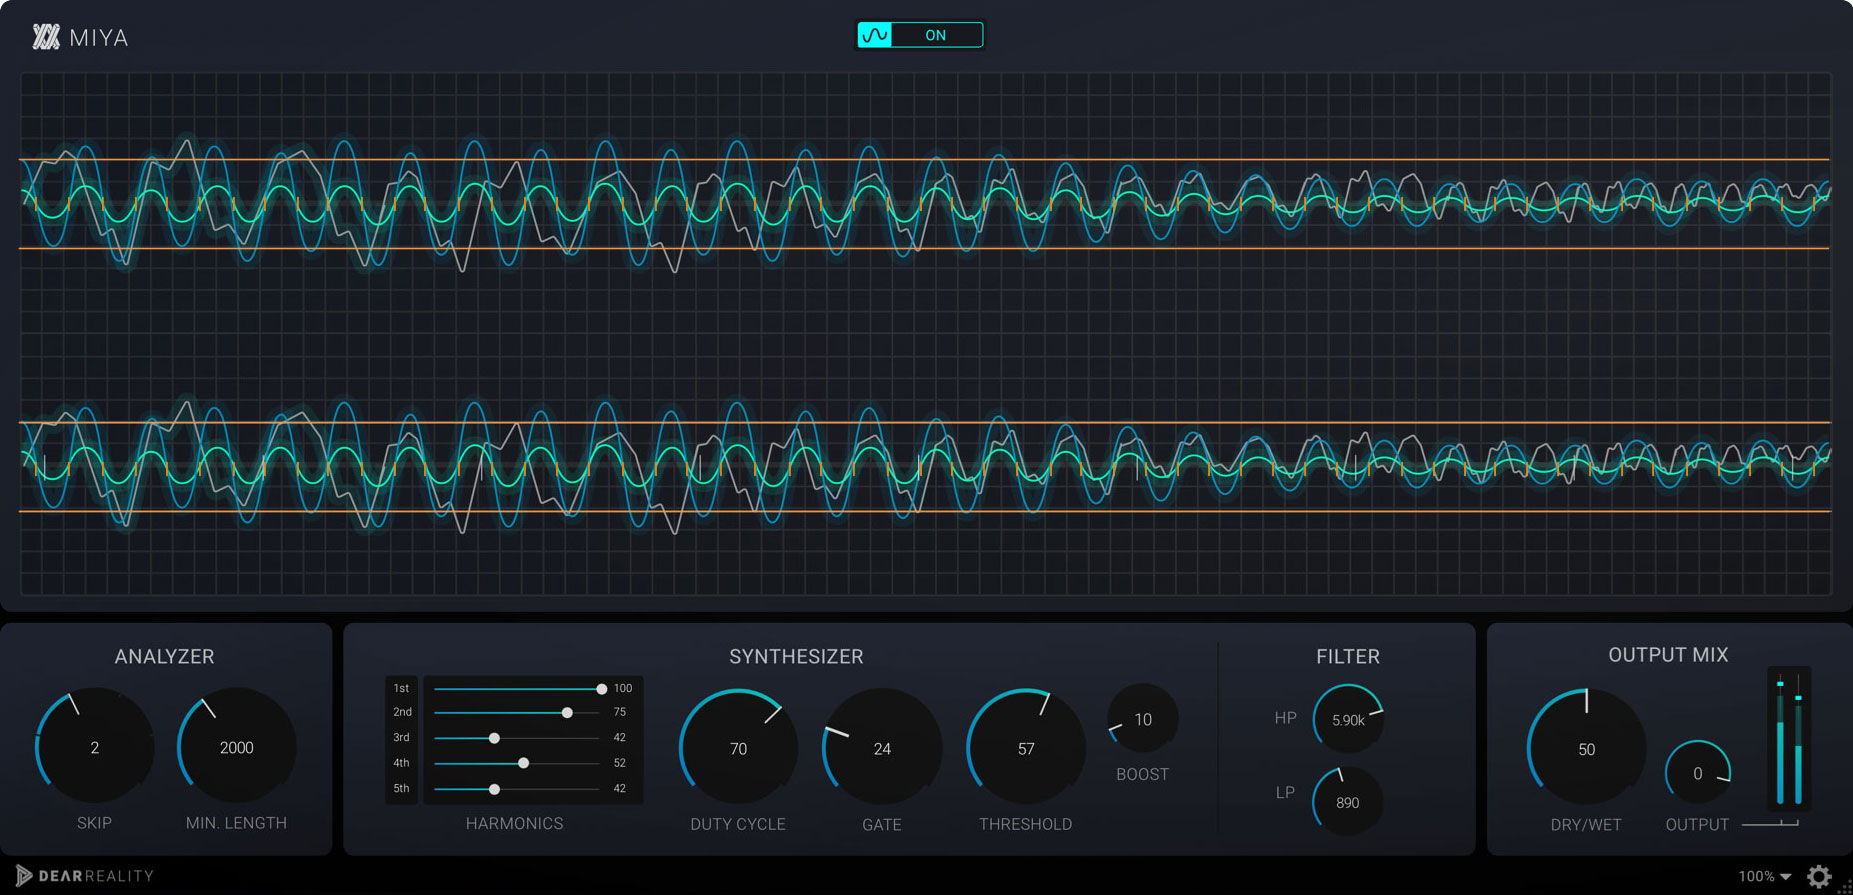 Dear Reality’s MIYA plugin is a completely new take on distortion